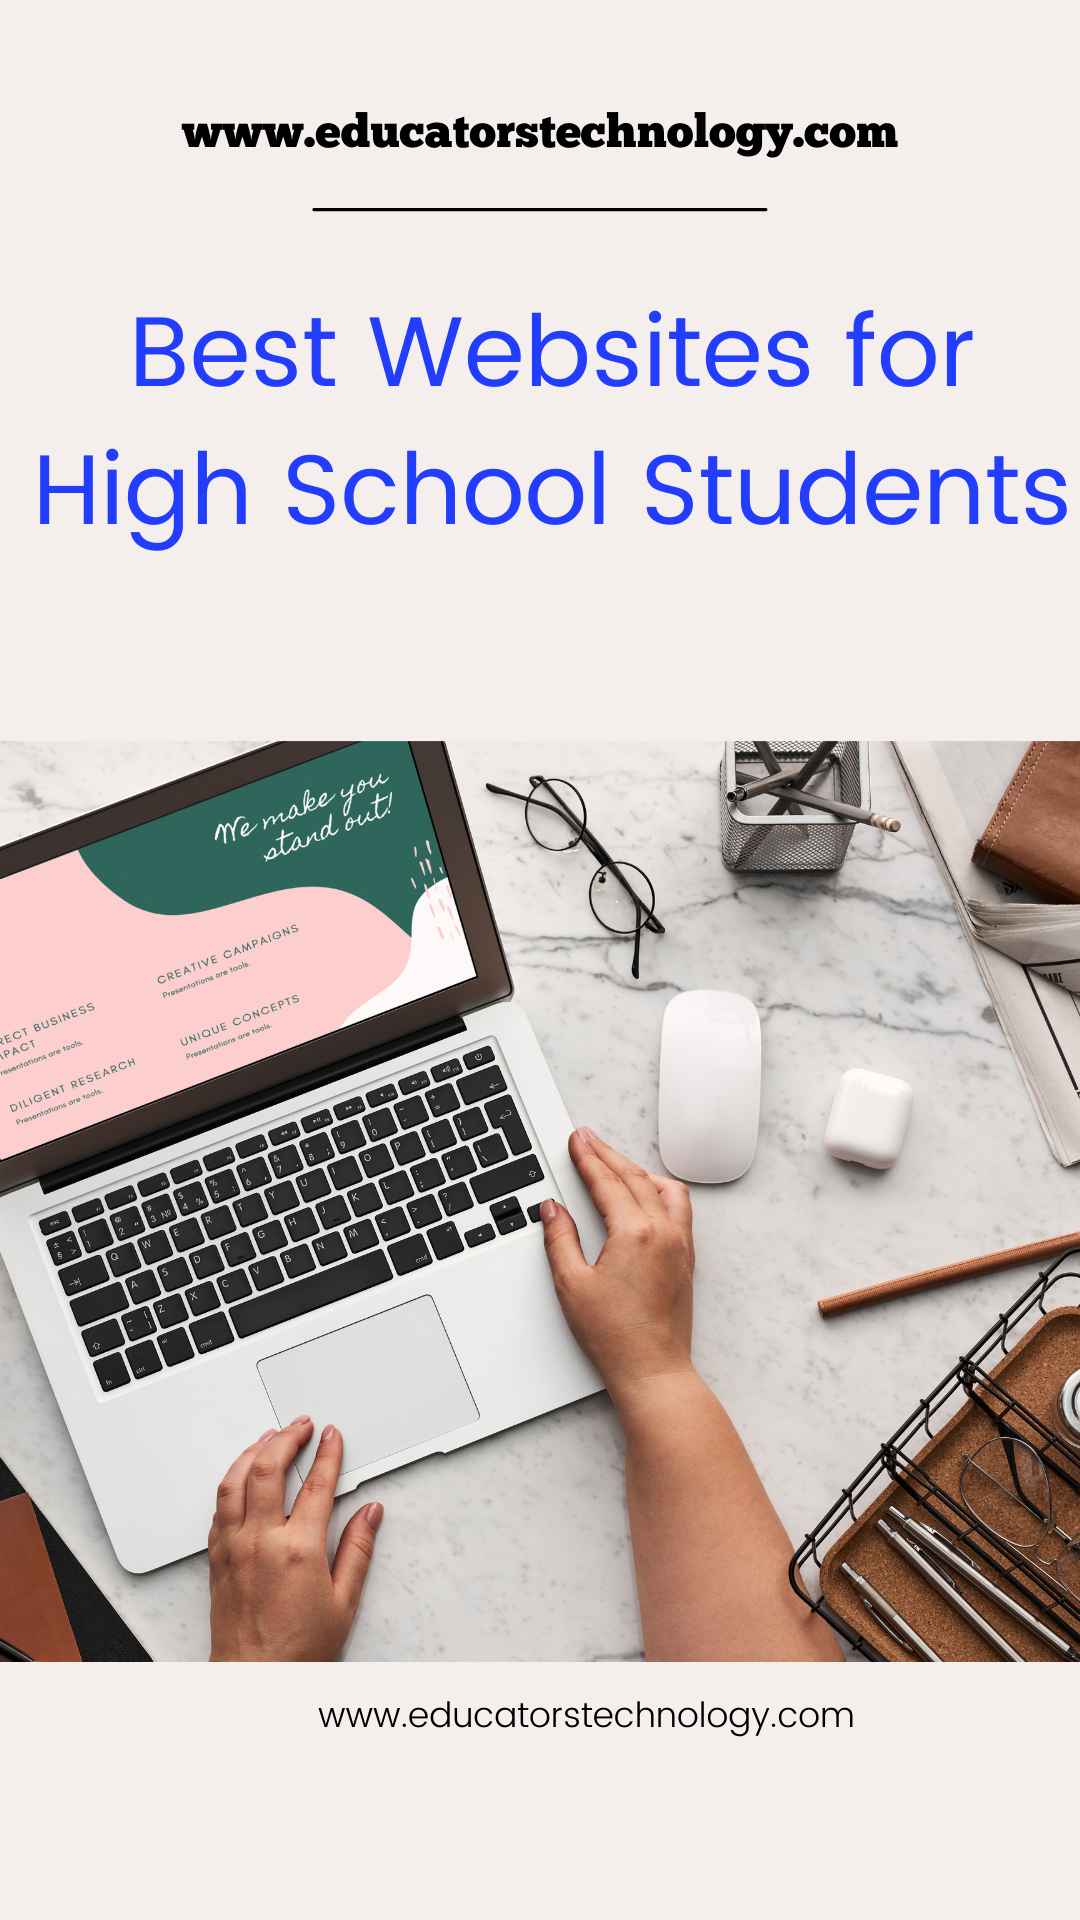 10 Excellent Educational Websites for High School Students